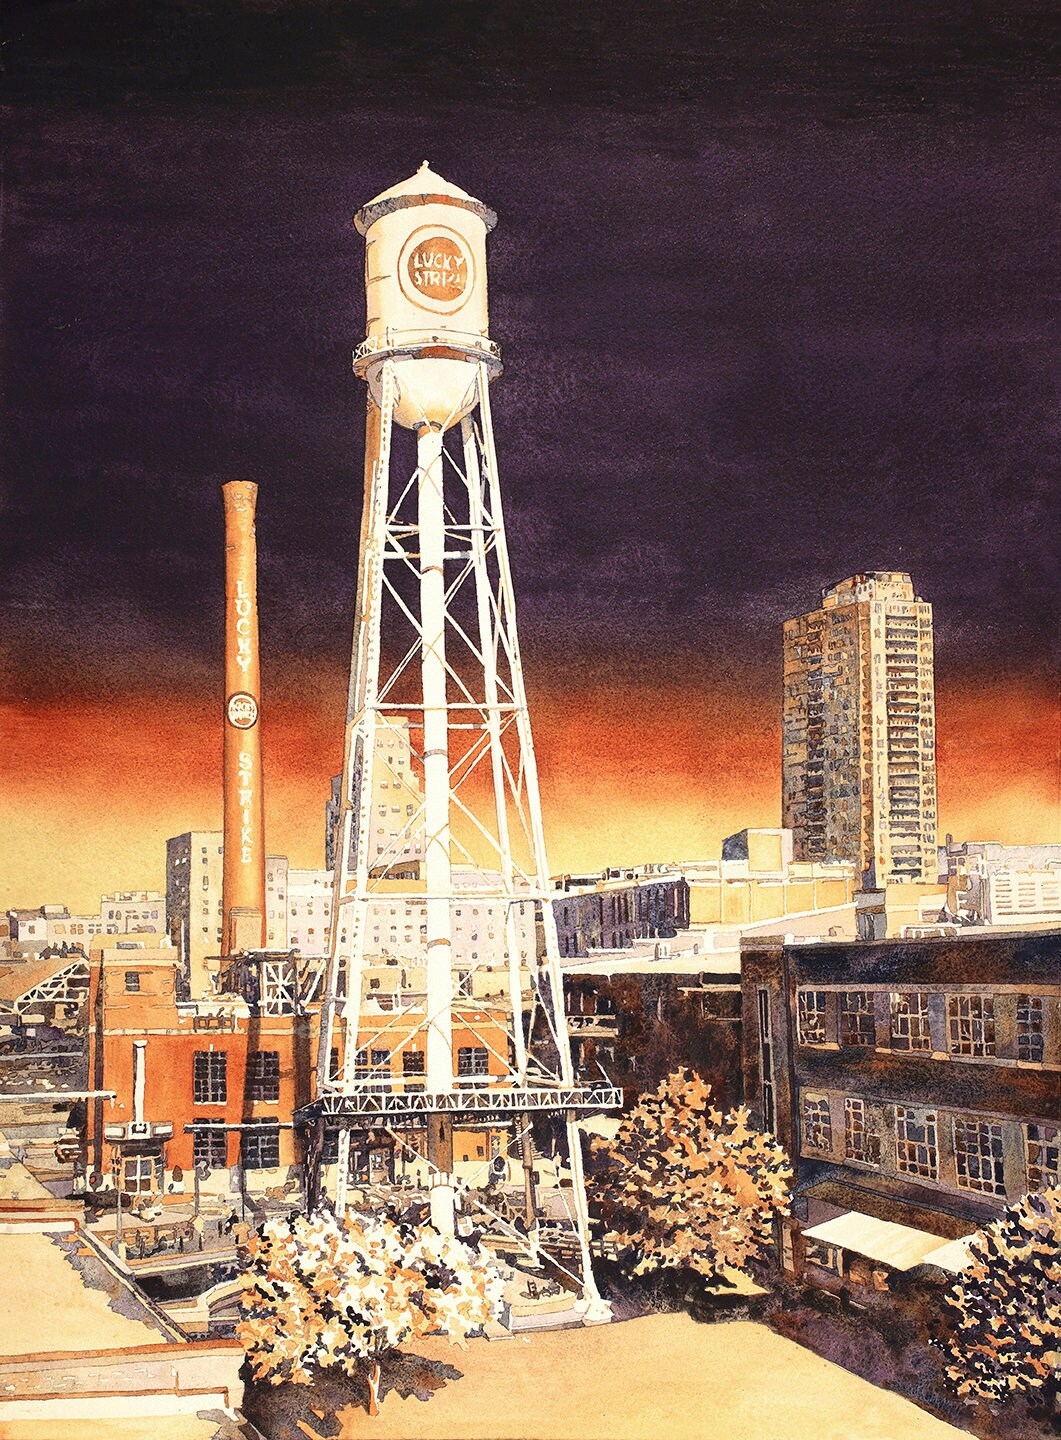 Durham, NC skyline painting. Water tower on the American Tobacco Campus in downtown Durham, NC at sunset Durham artwork home decor sunset (print)